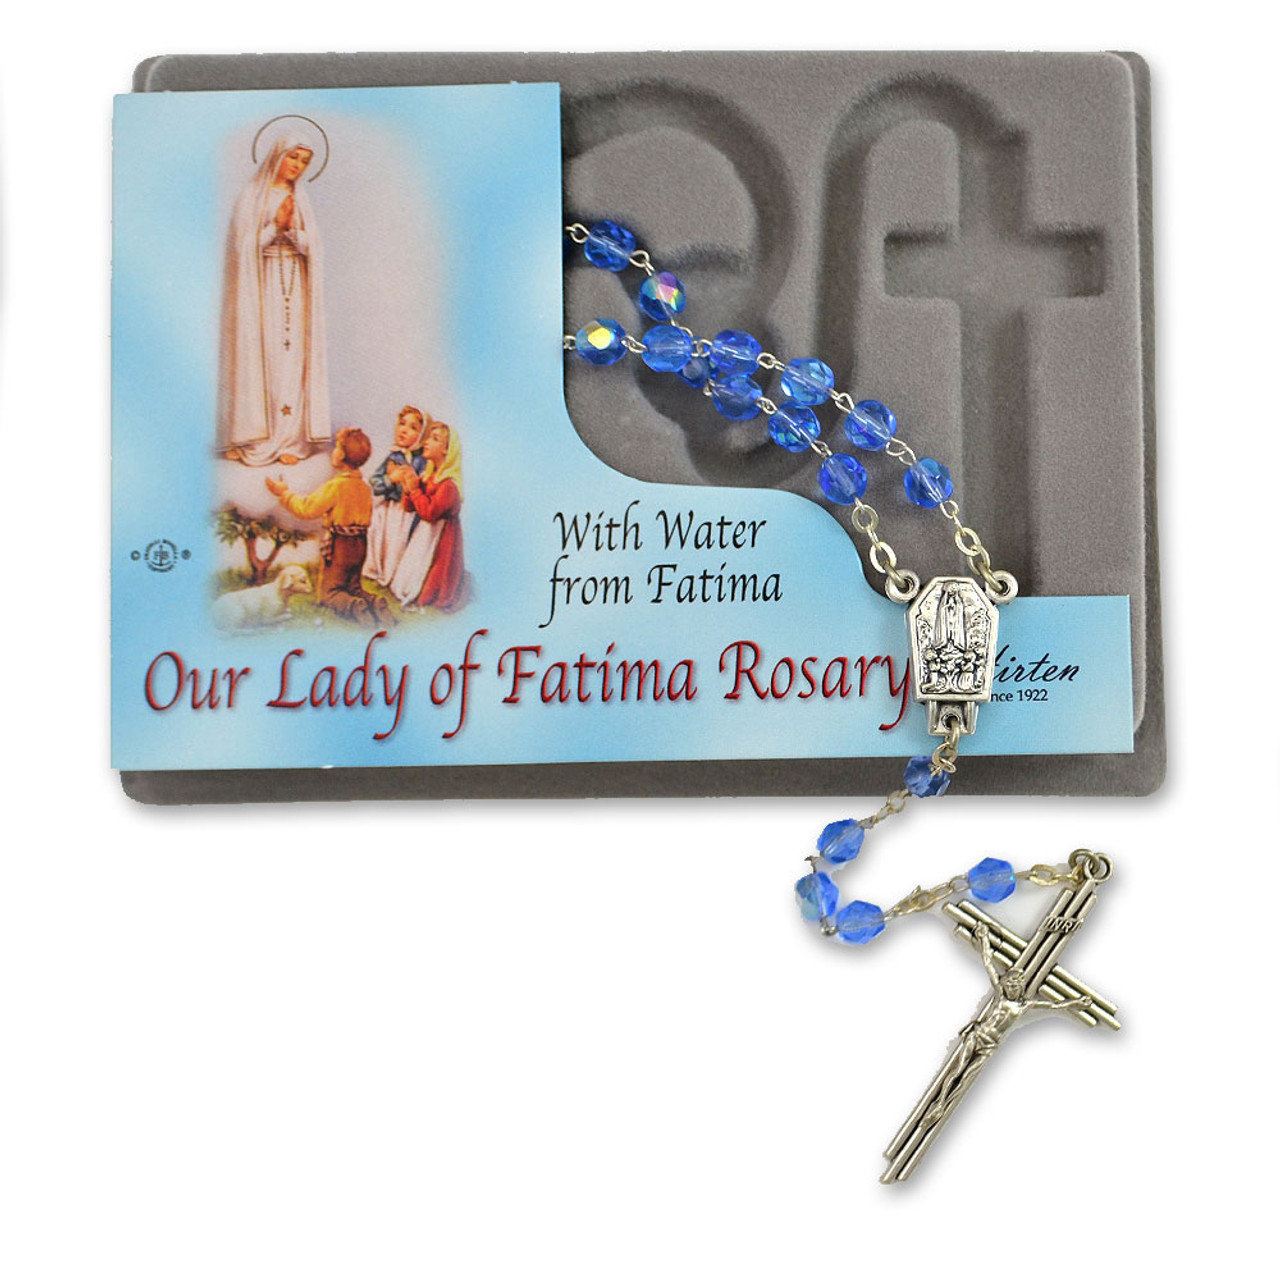 Our Lady of Fatima Rosary Boxed